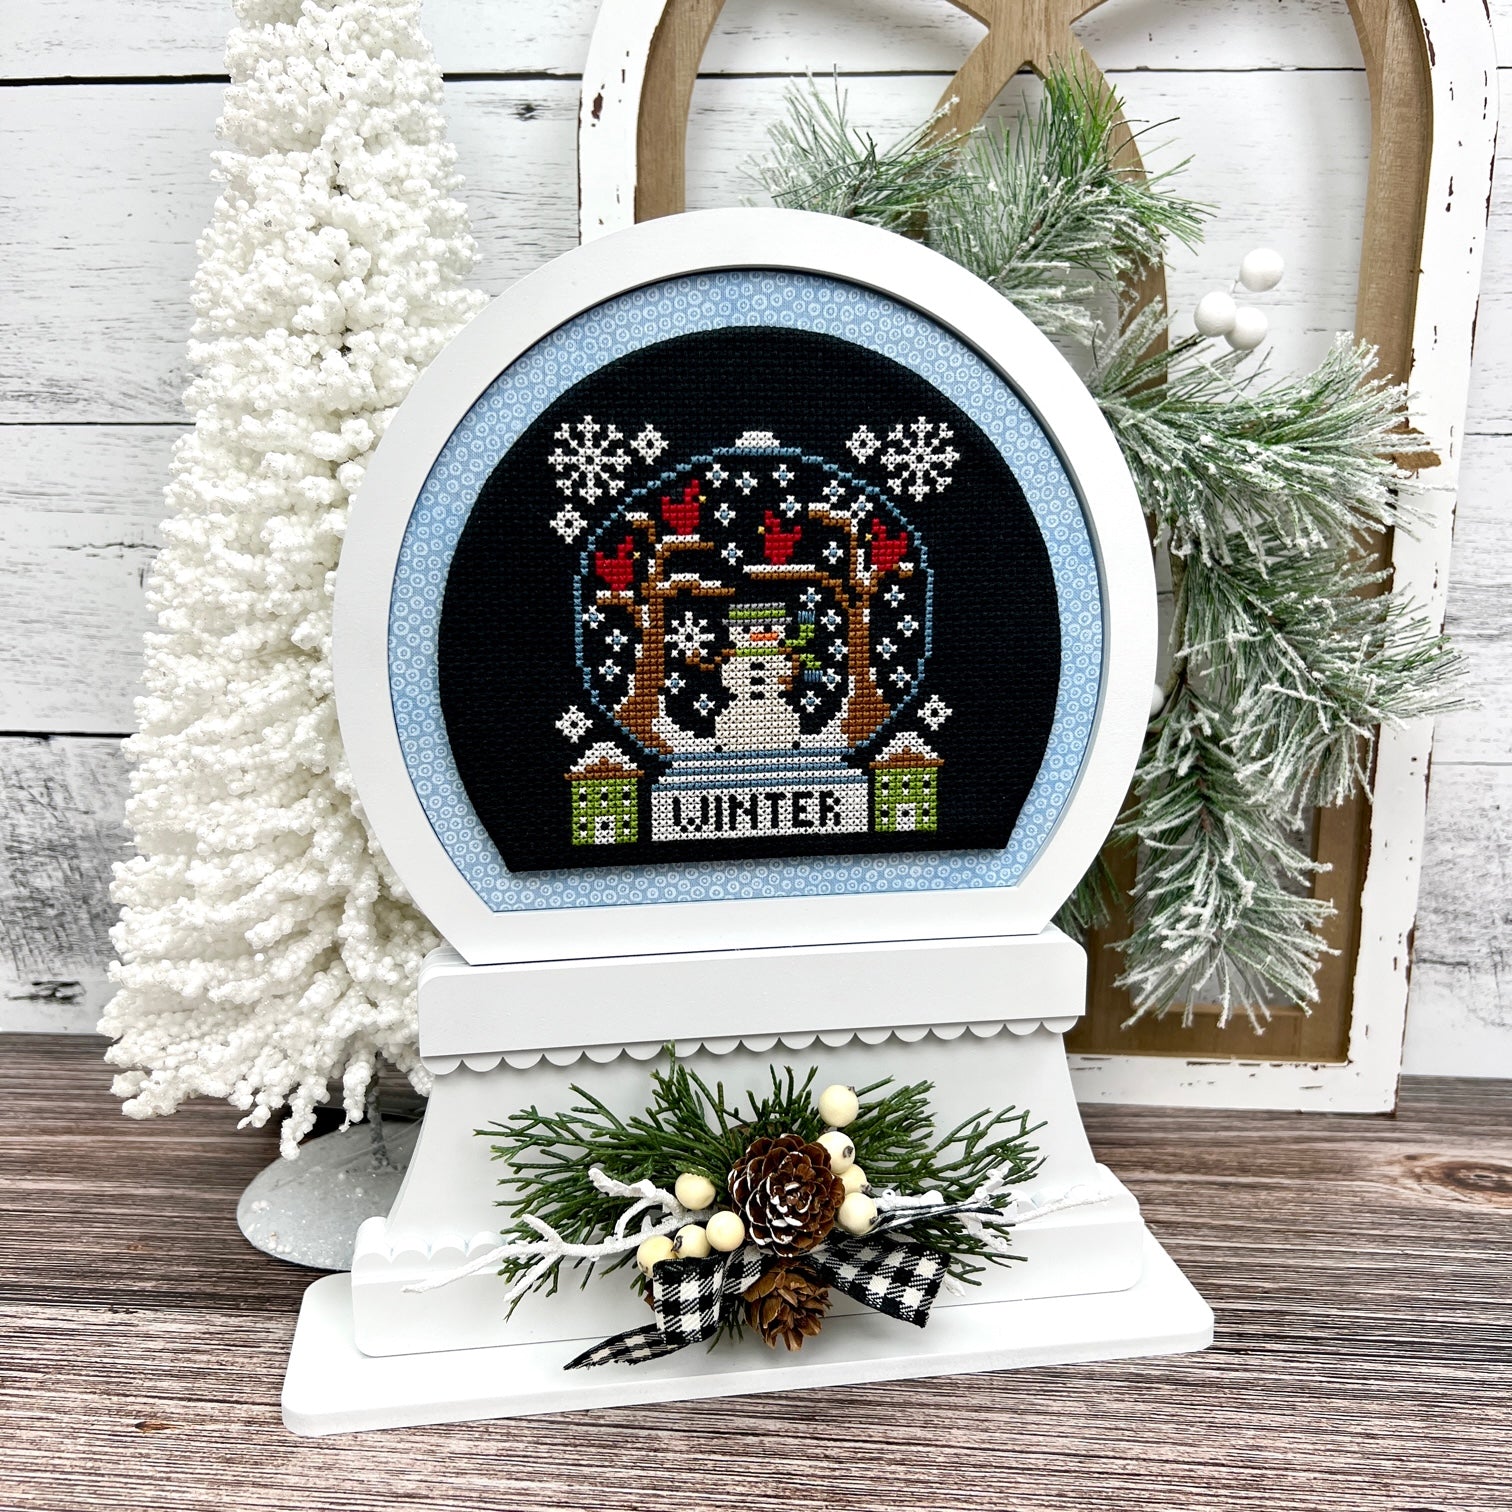 How to assemble our cross stitch snow globe display